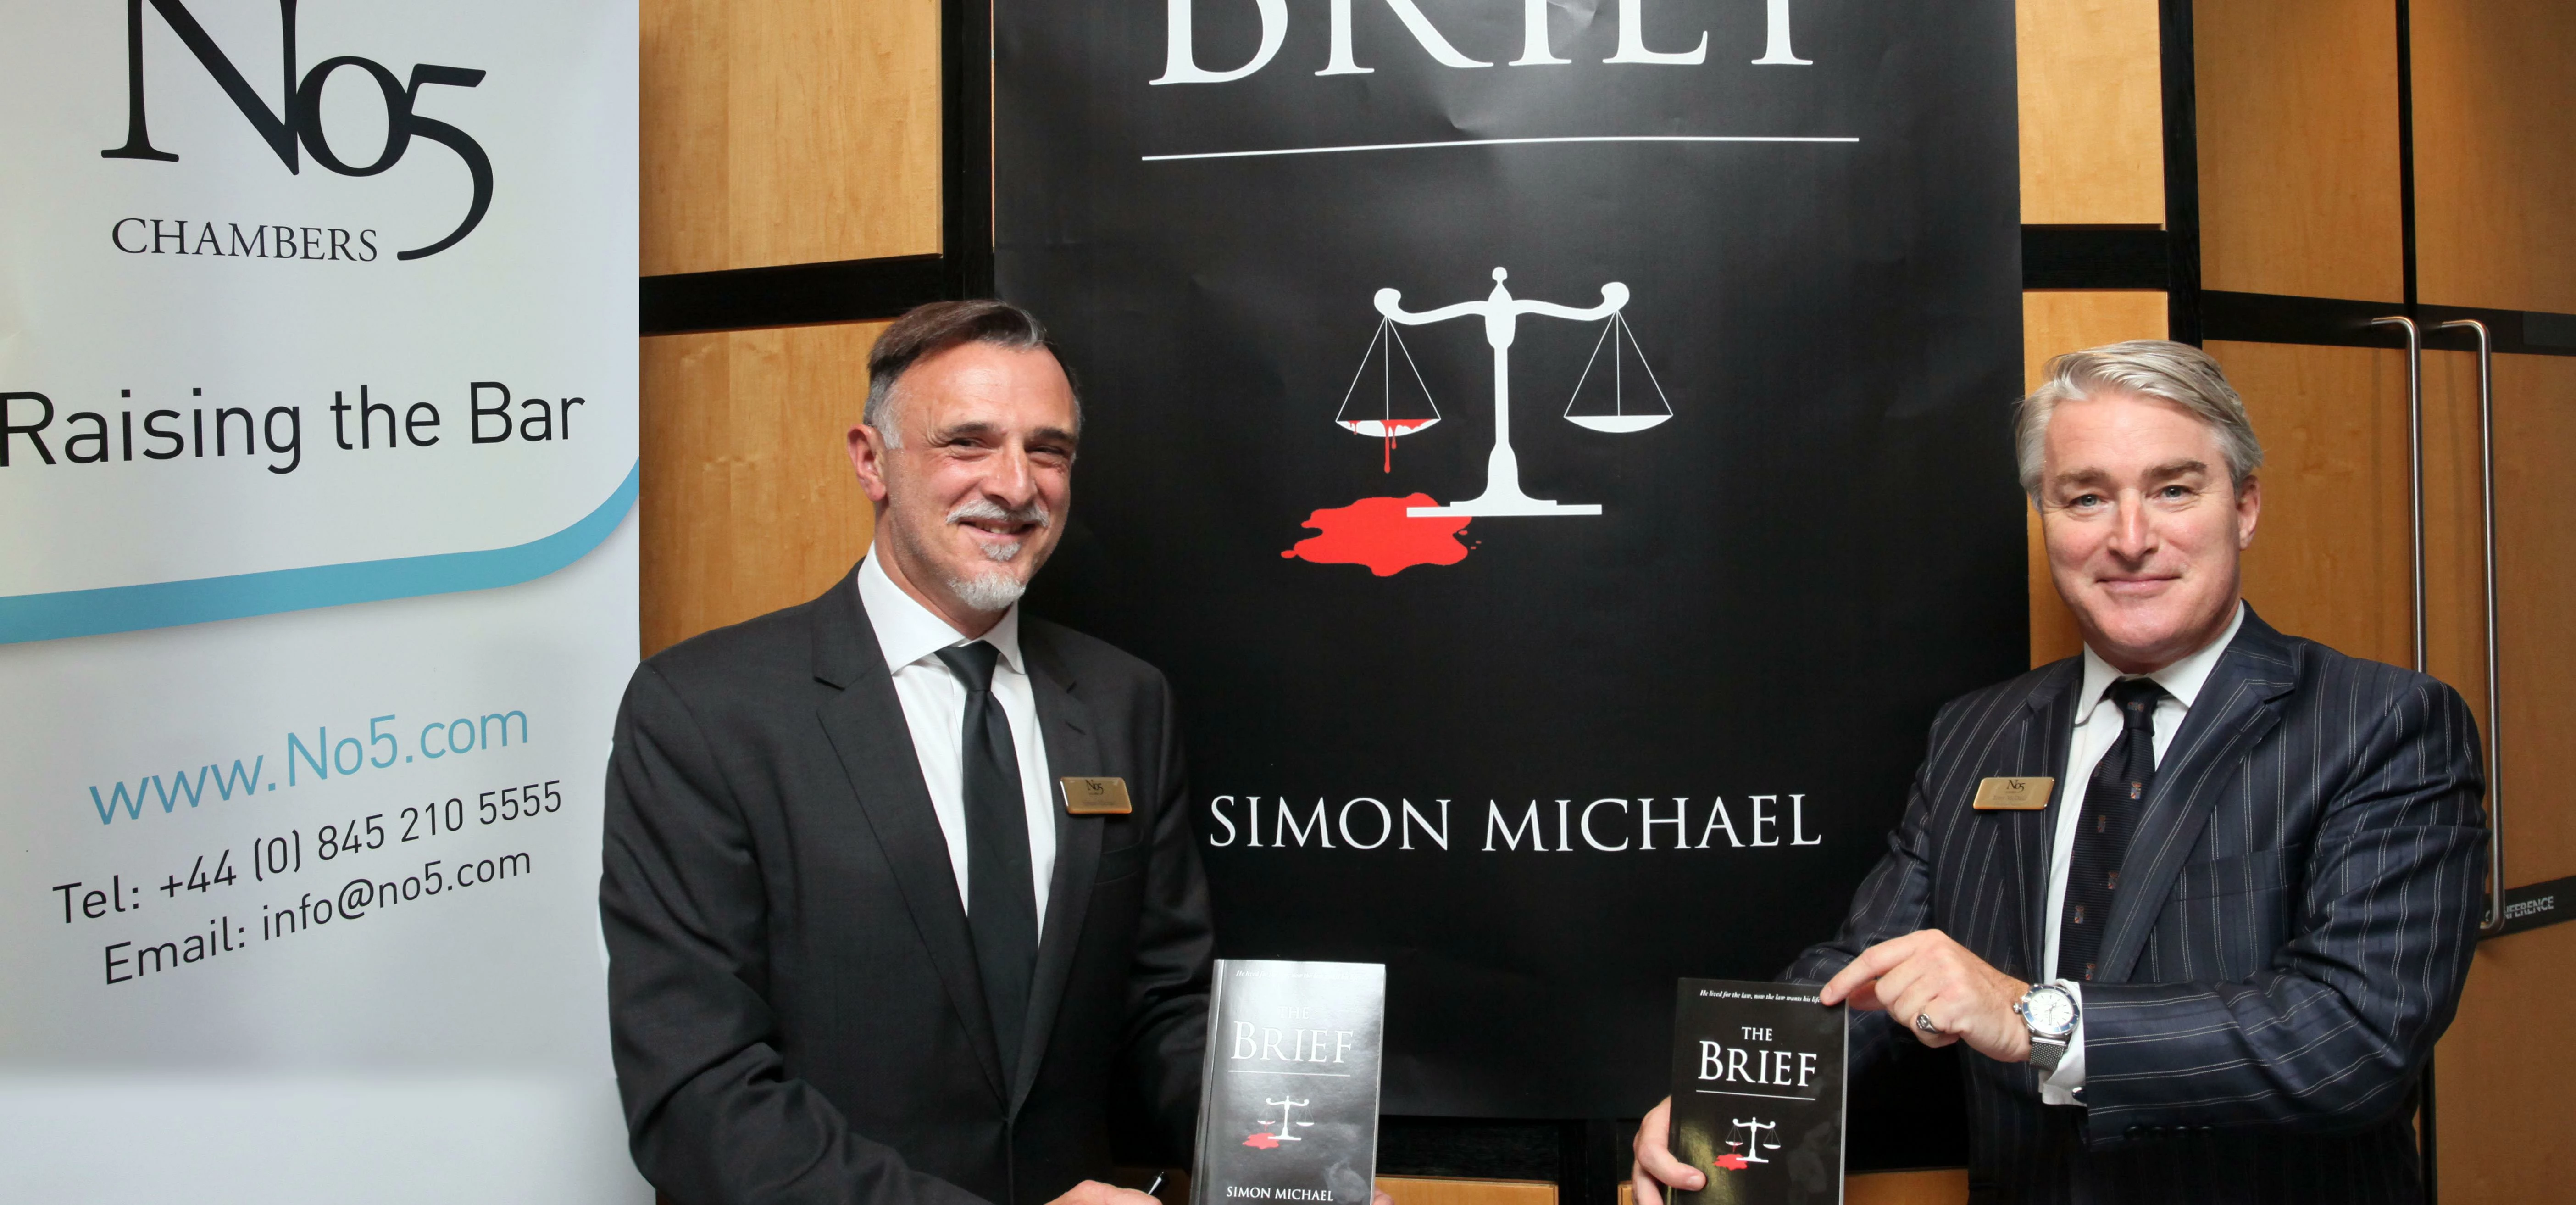 No5 Chambers barrister and author Simon Michael at the launch of his crime novel The Brief, pictured